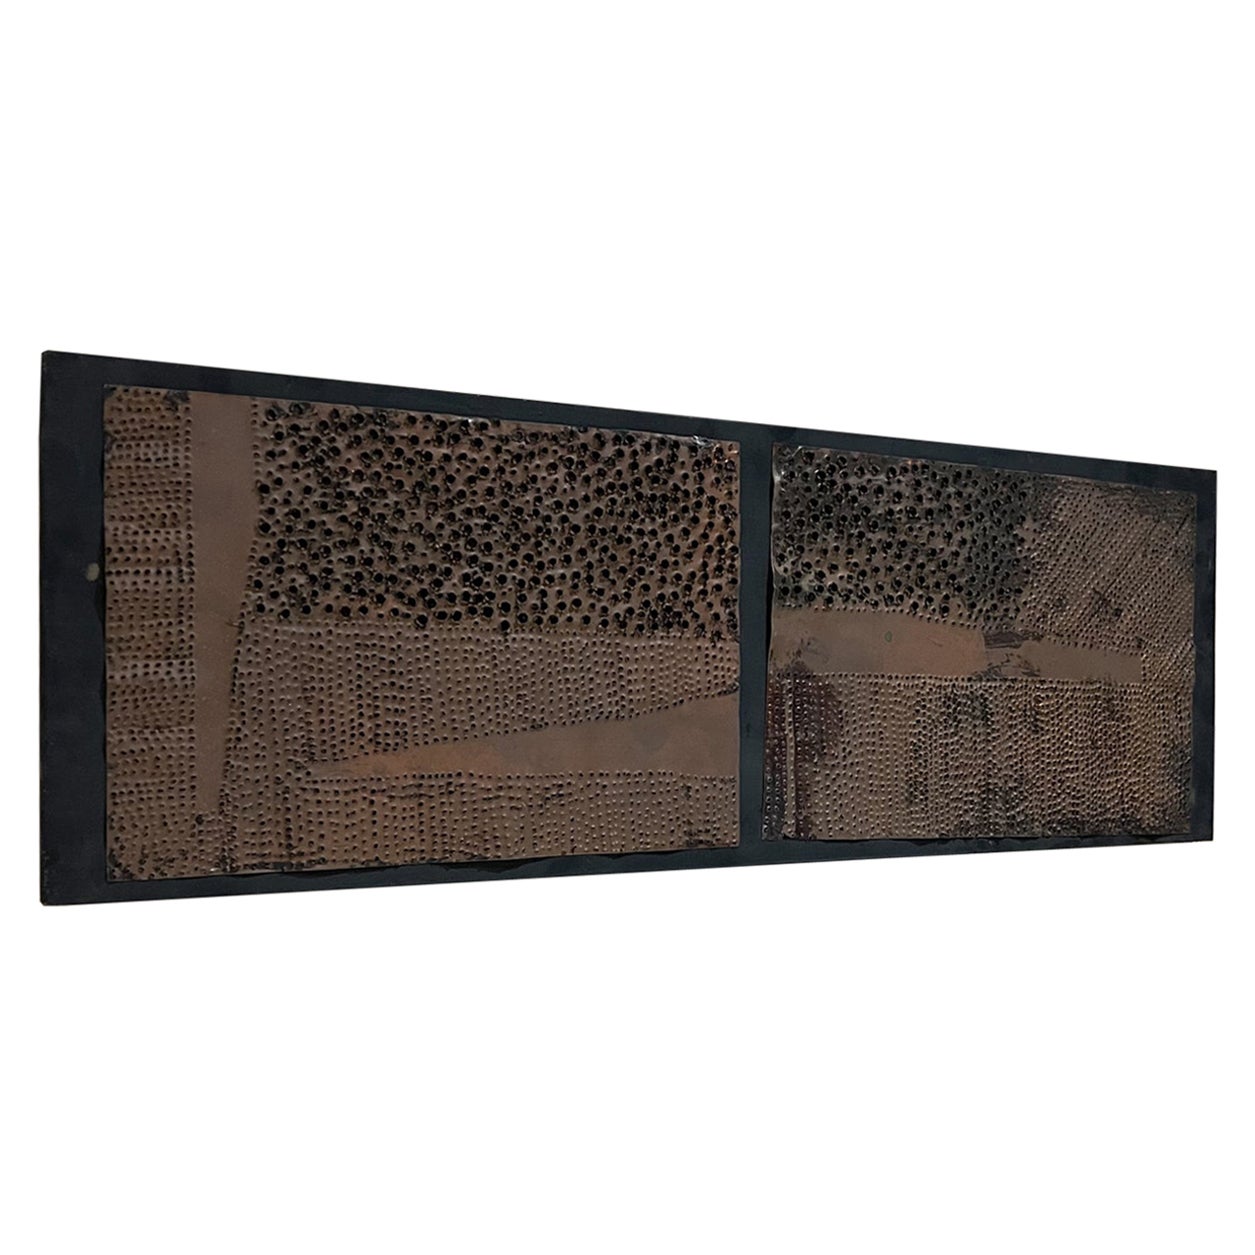 1970s Modern Wall Art Brutalist Perforated Copper Metal on Wood For Sale